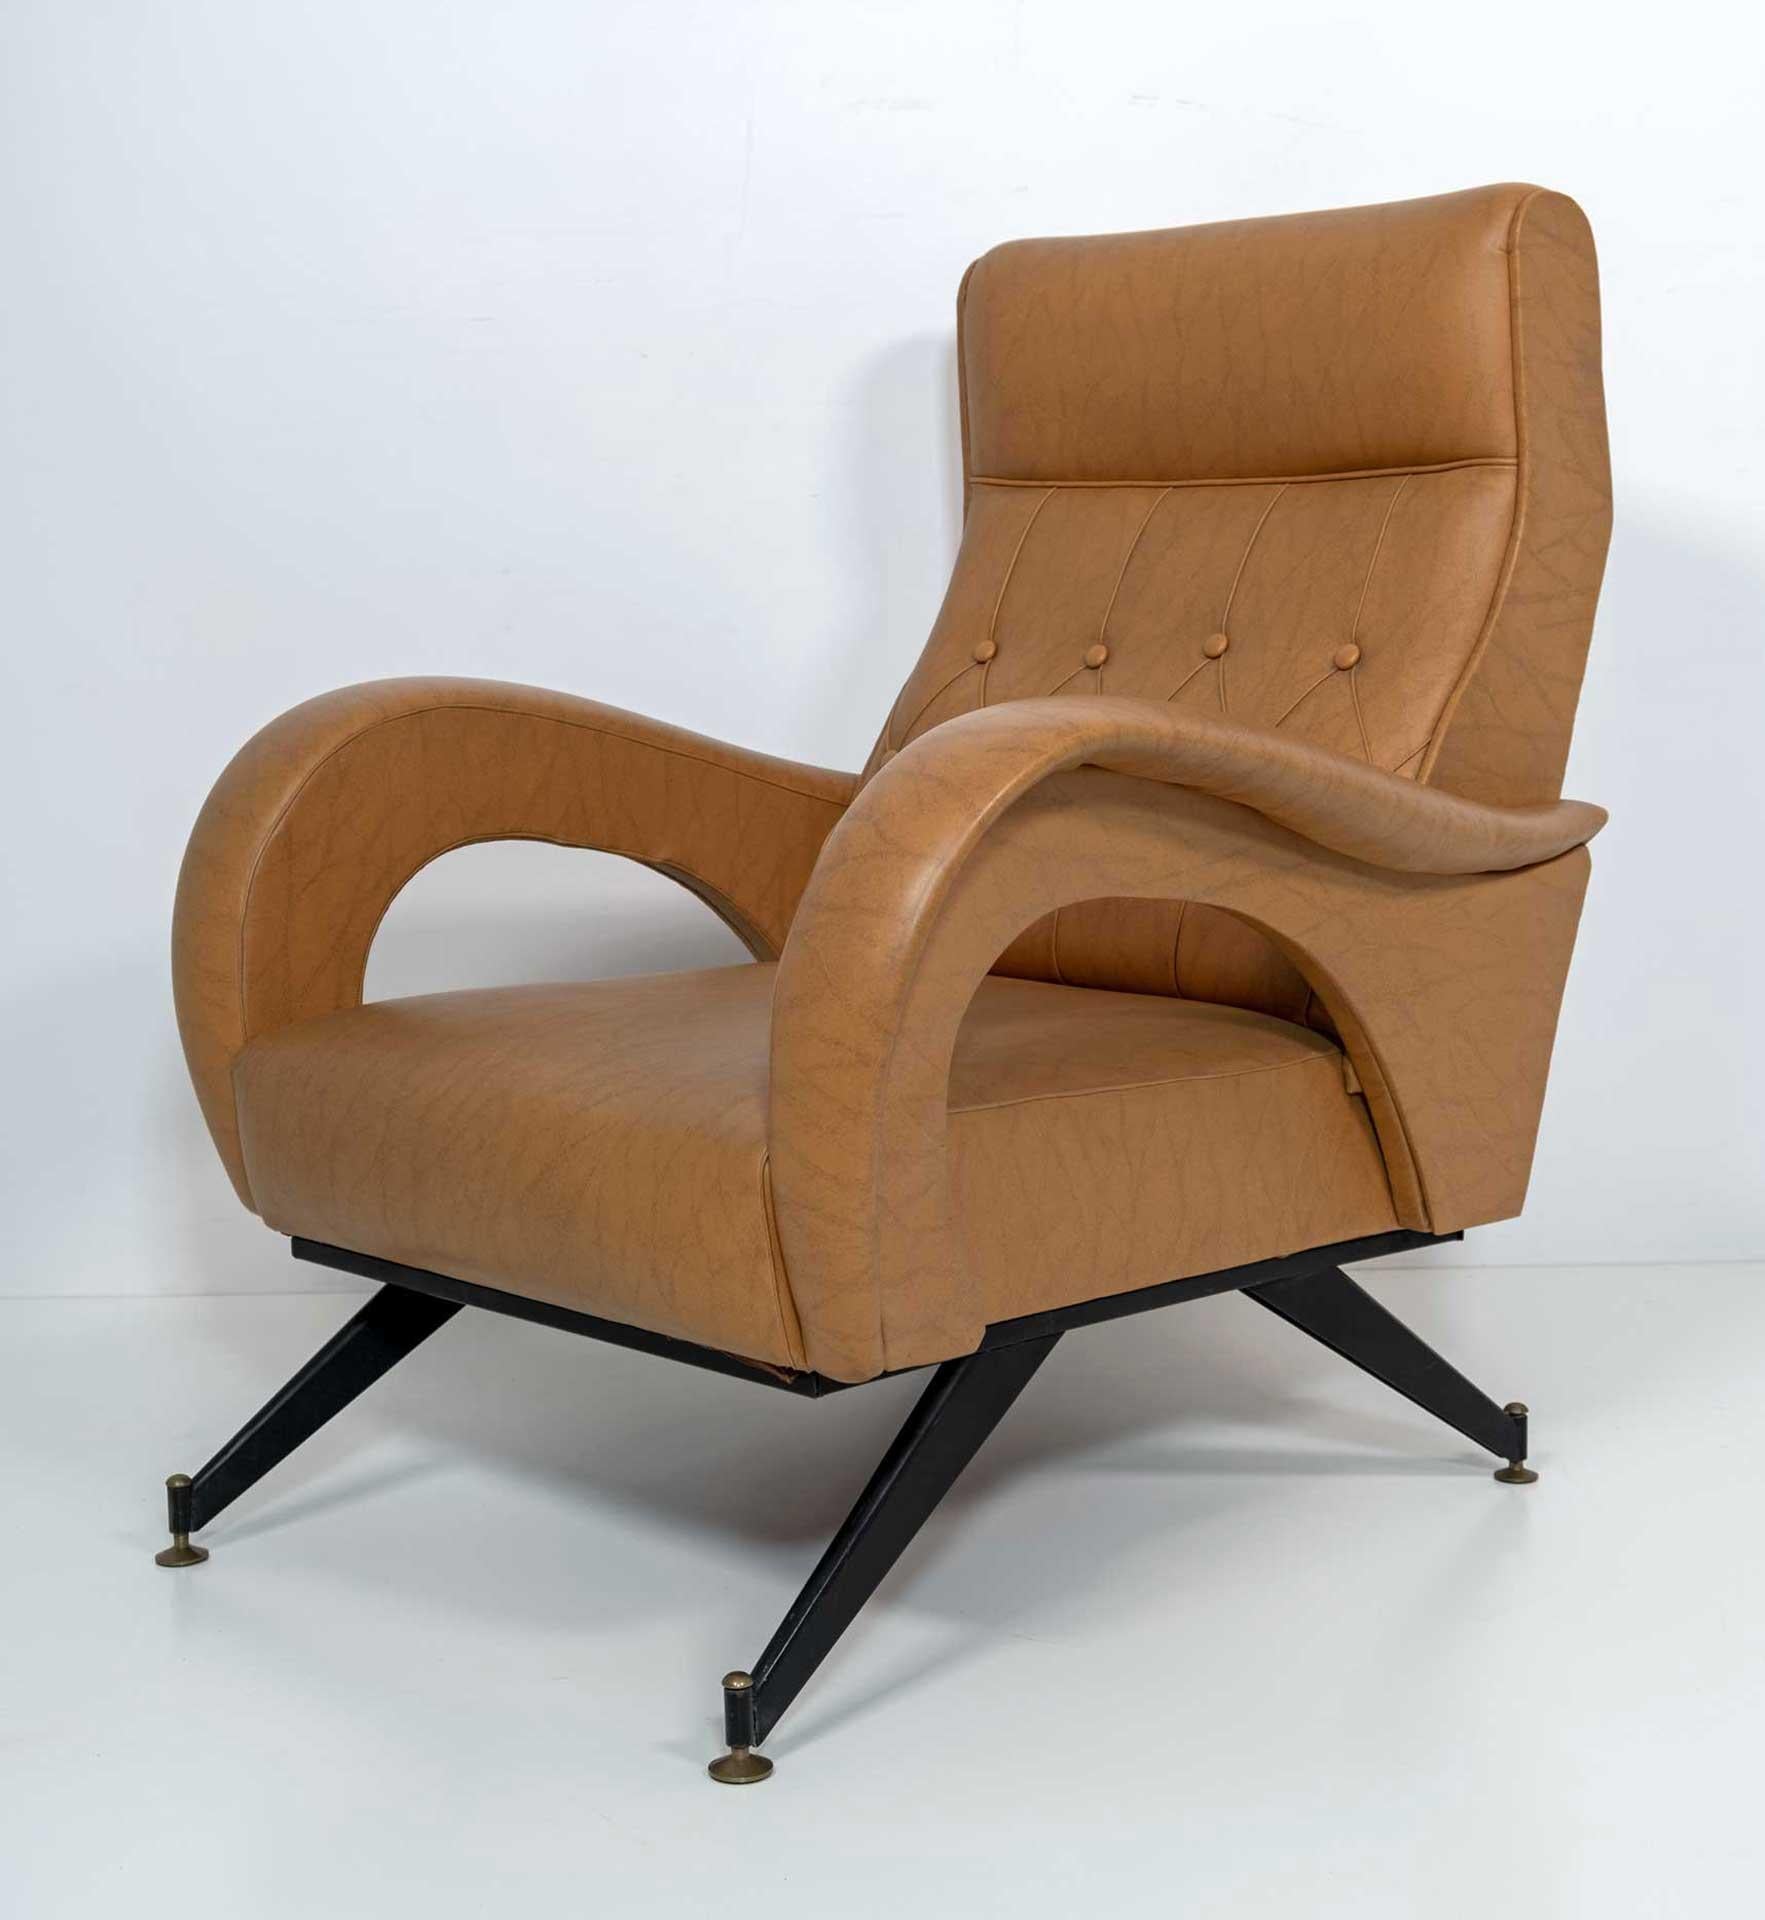 Late 20th Century Marco Zanuso Style Mid-Century Modern Italian Leather Lounge Chair, 1970s For Sale